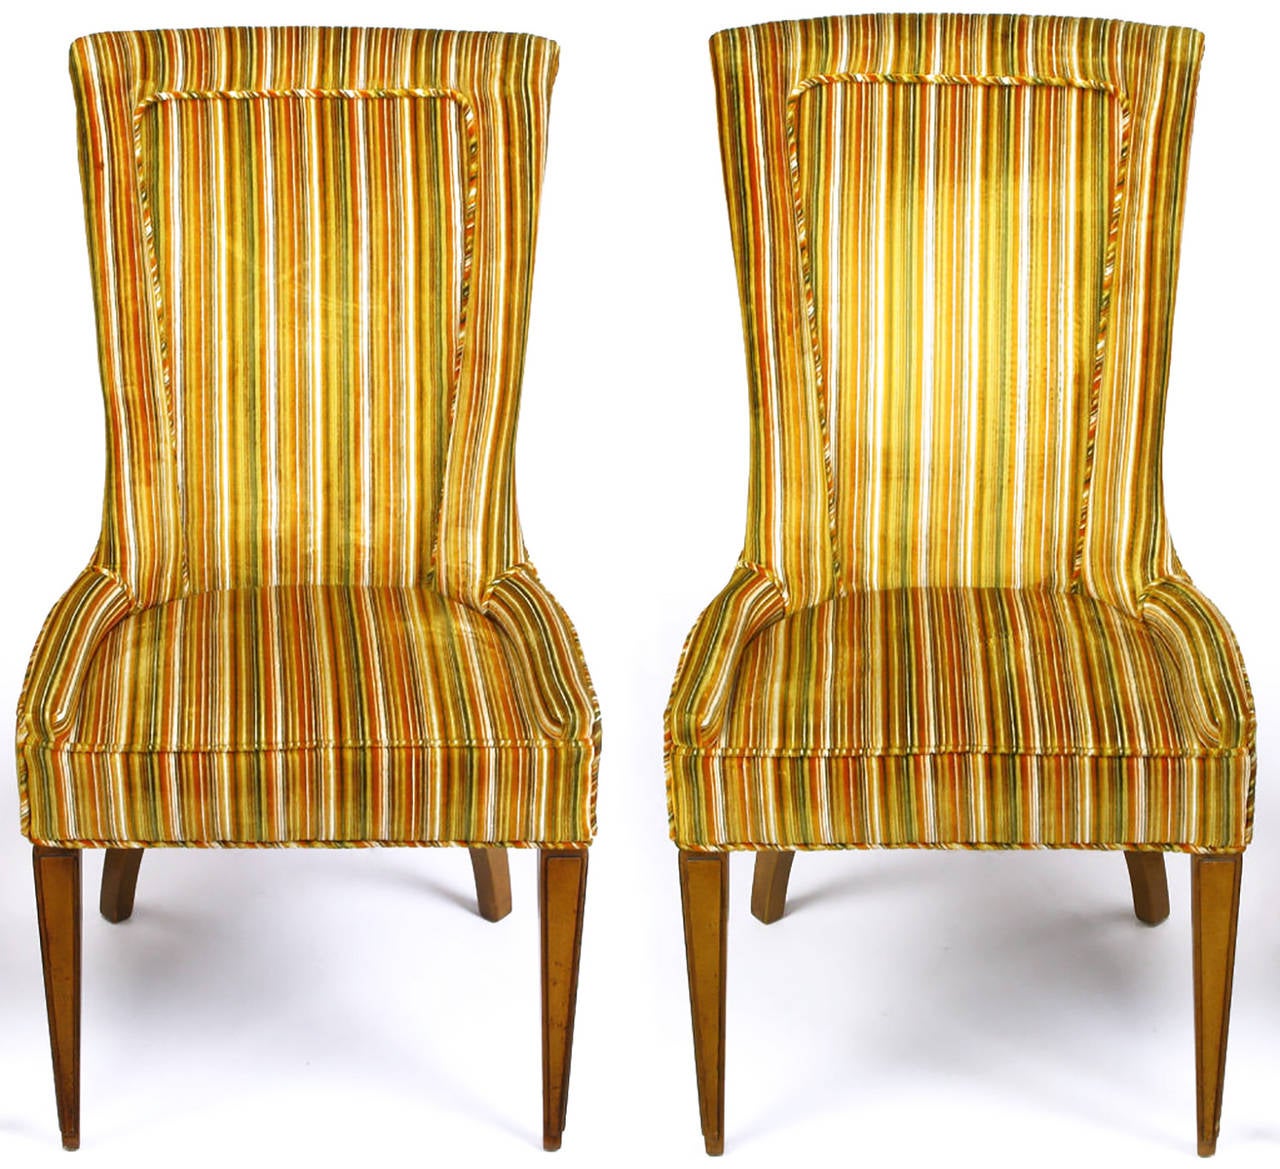 Pair of striped and cut velvet Empire style armchairs with inset seat cushions. Walnut carved and tapered front legs and canted curved back legs. Cut velvet upholstery striped in green, gold, burnt umber, brown and white. Excellent build quality, on